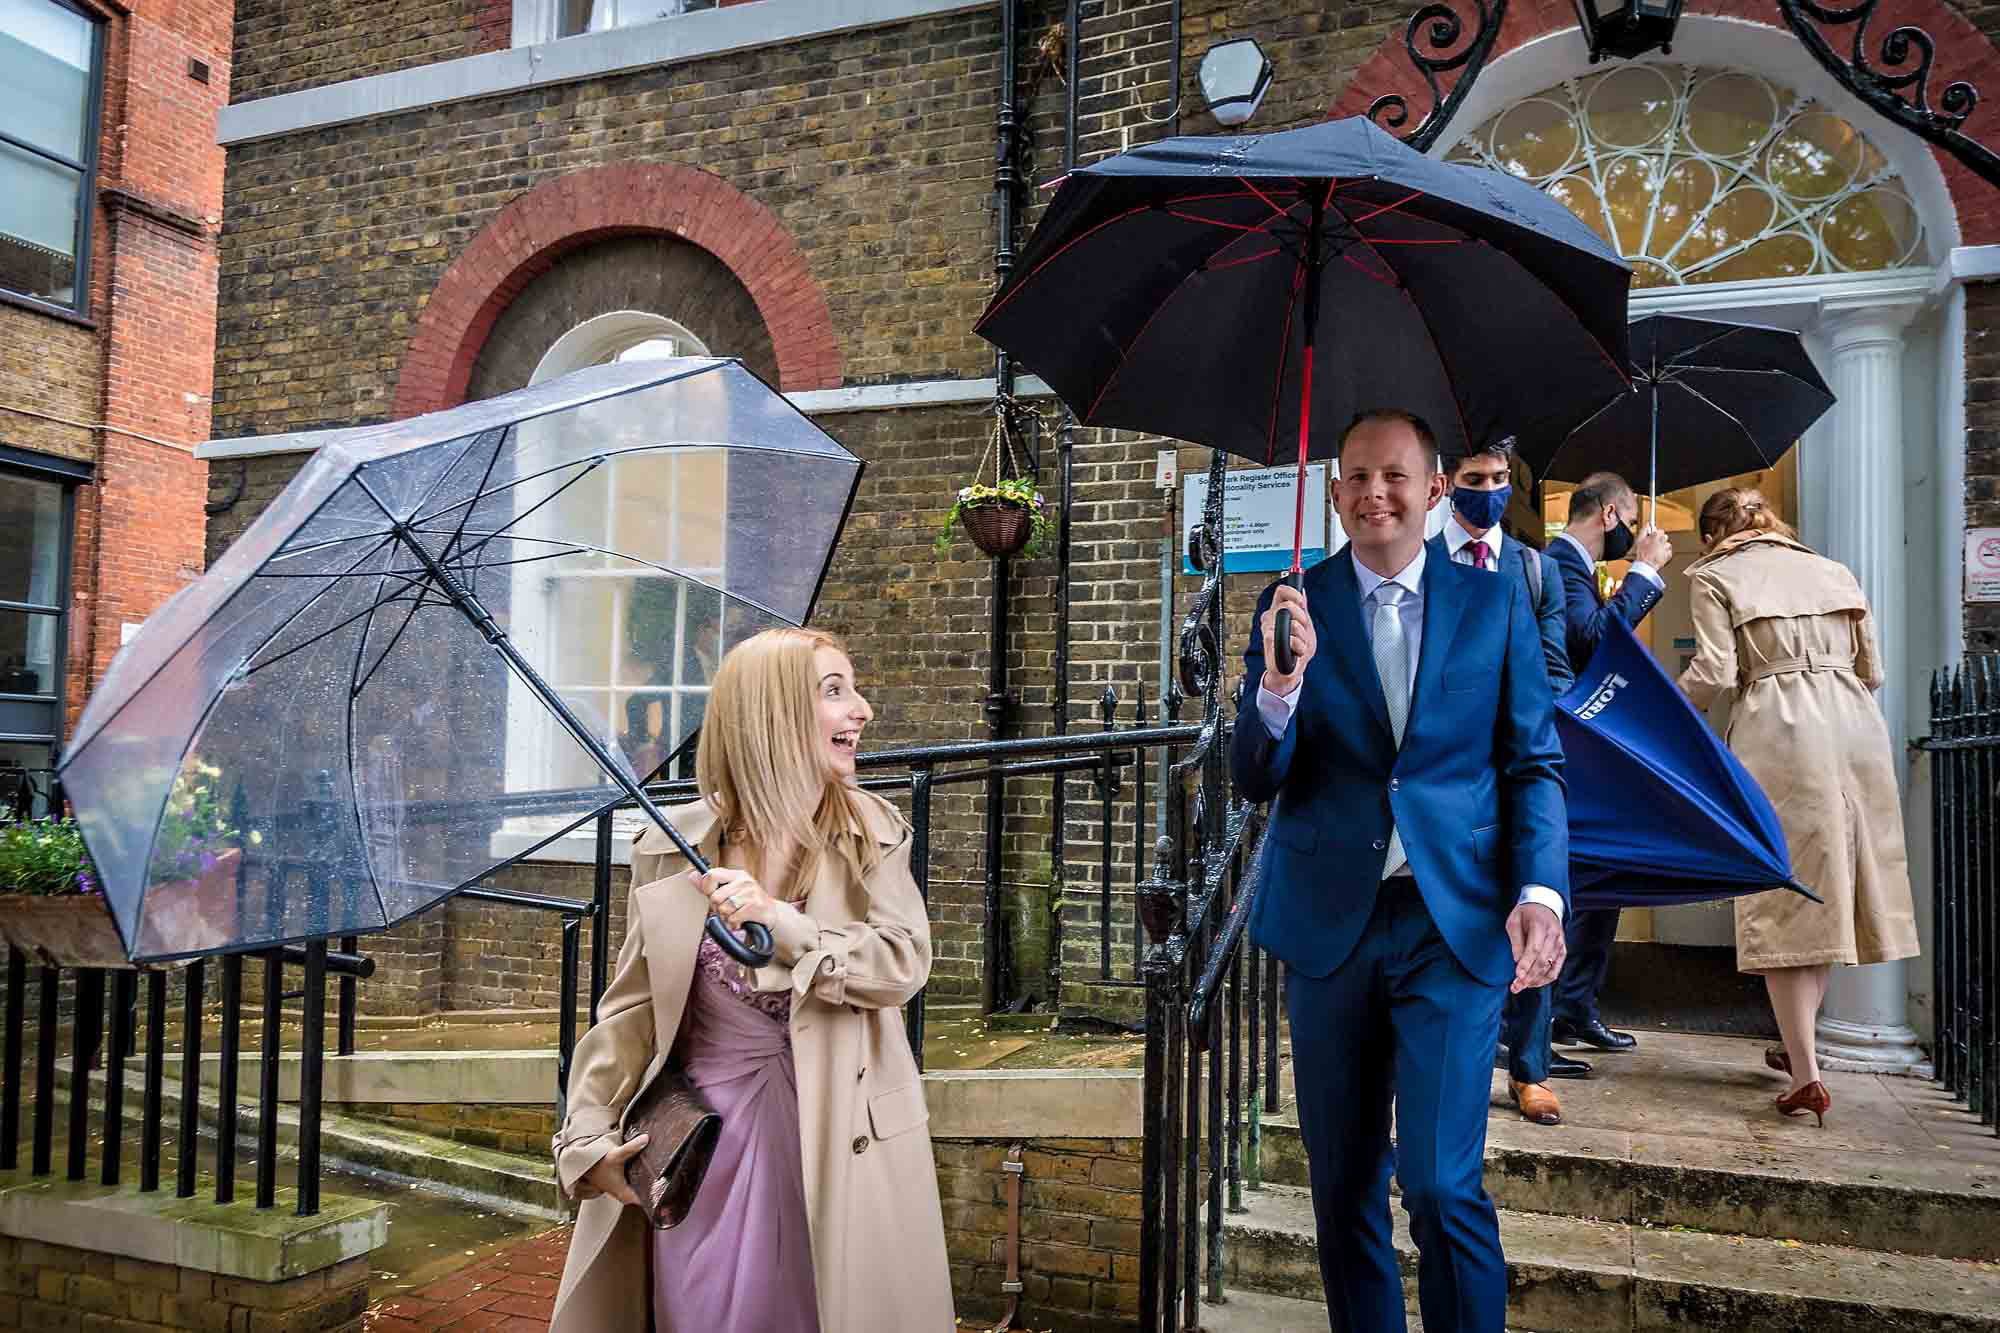 The newlyweds leave Southwark Register Office with umbrellas